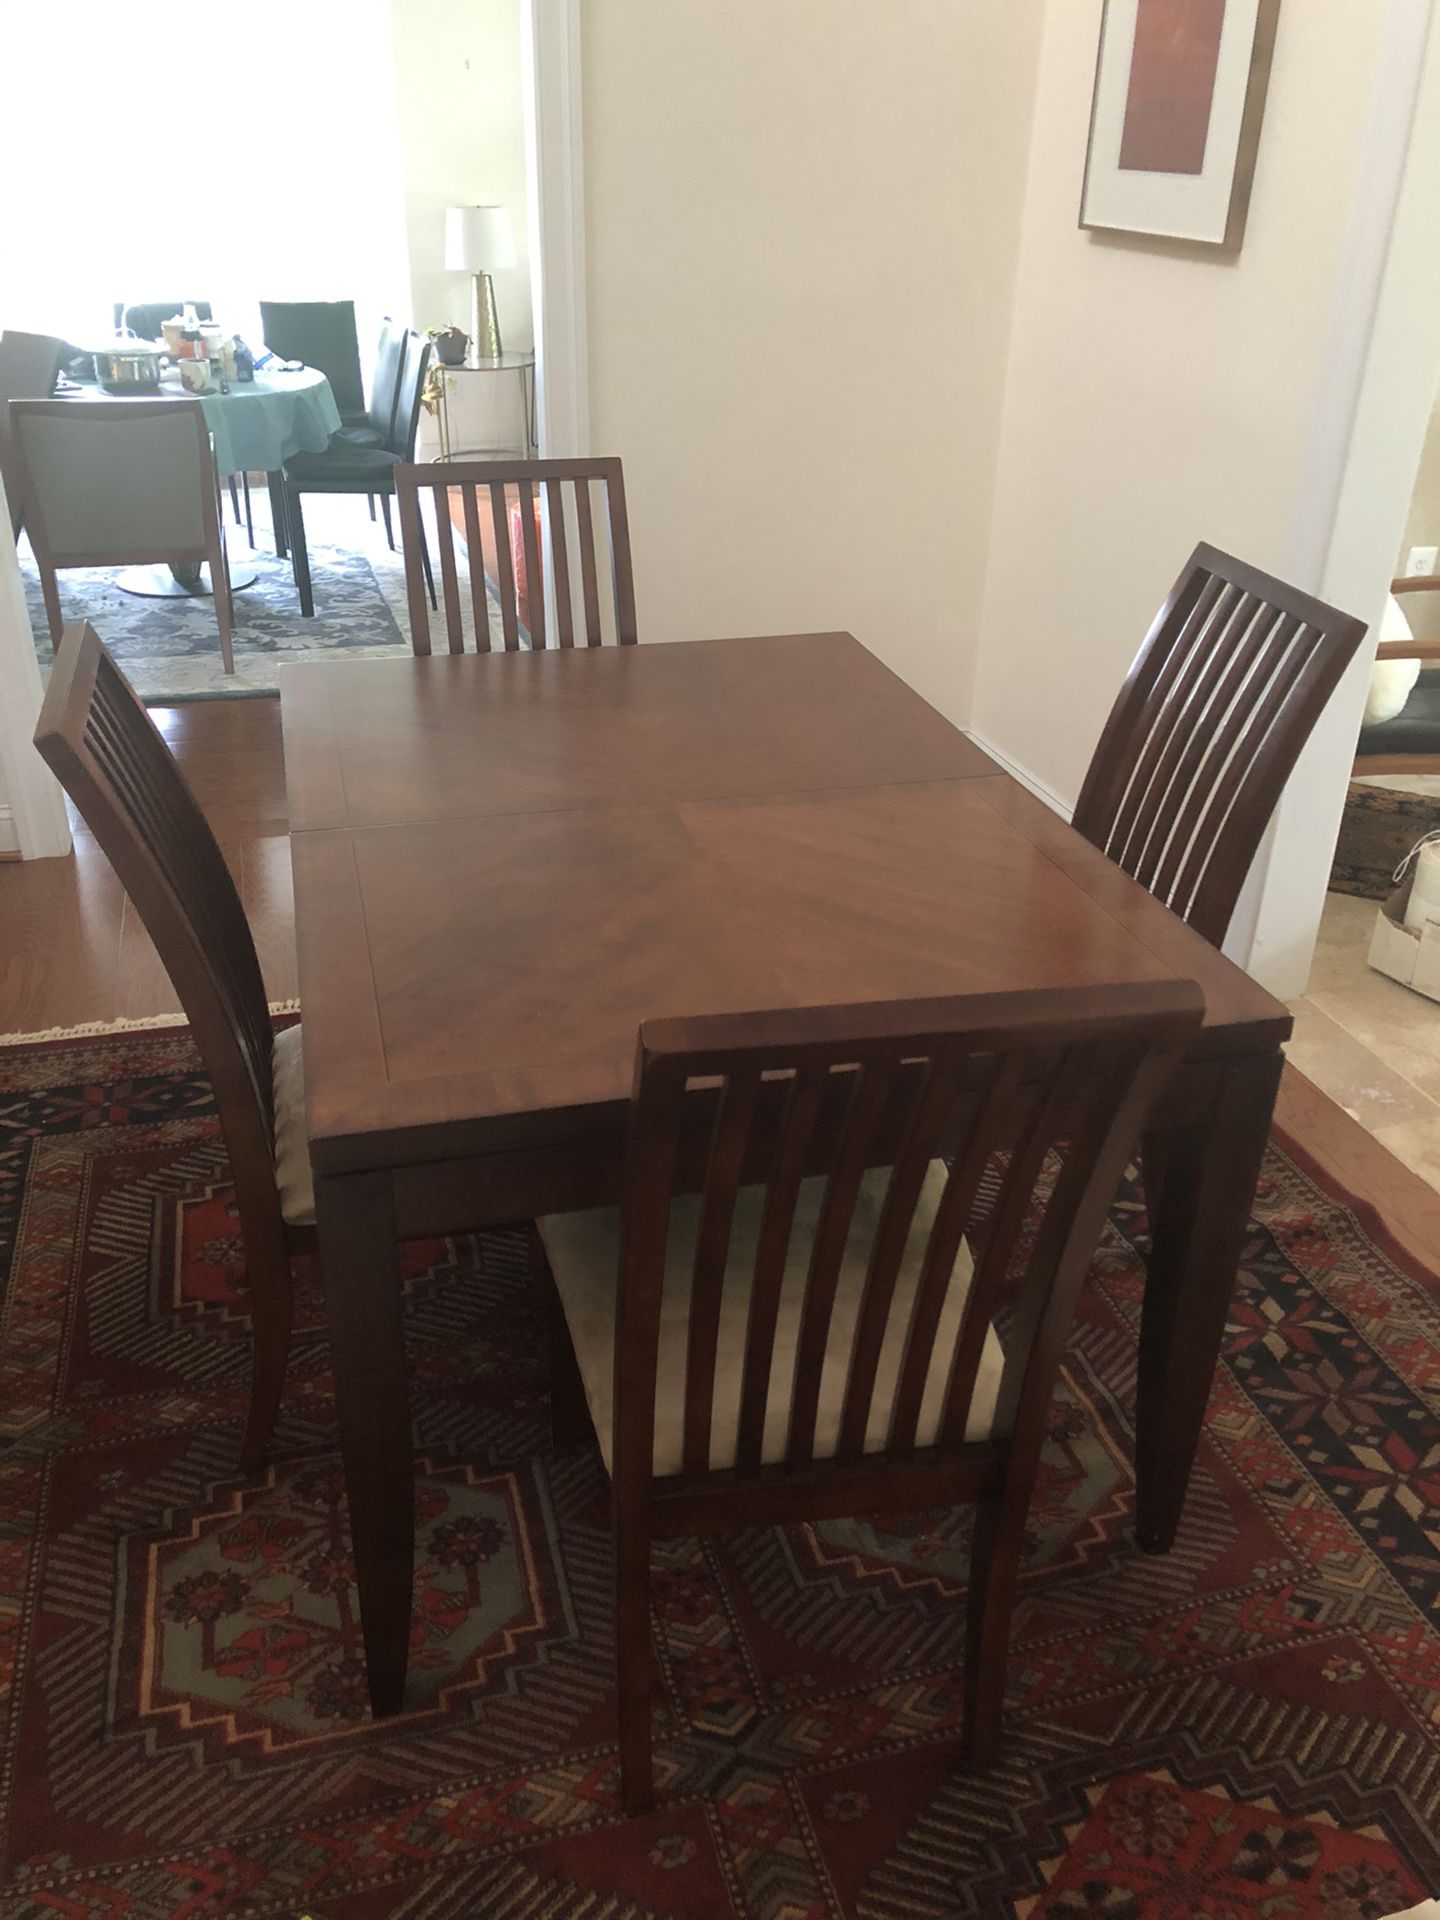 Dining table with extension and four chairs. 66” with a 12” extension. $150